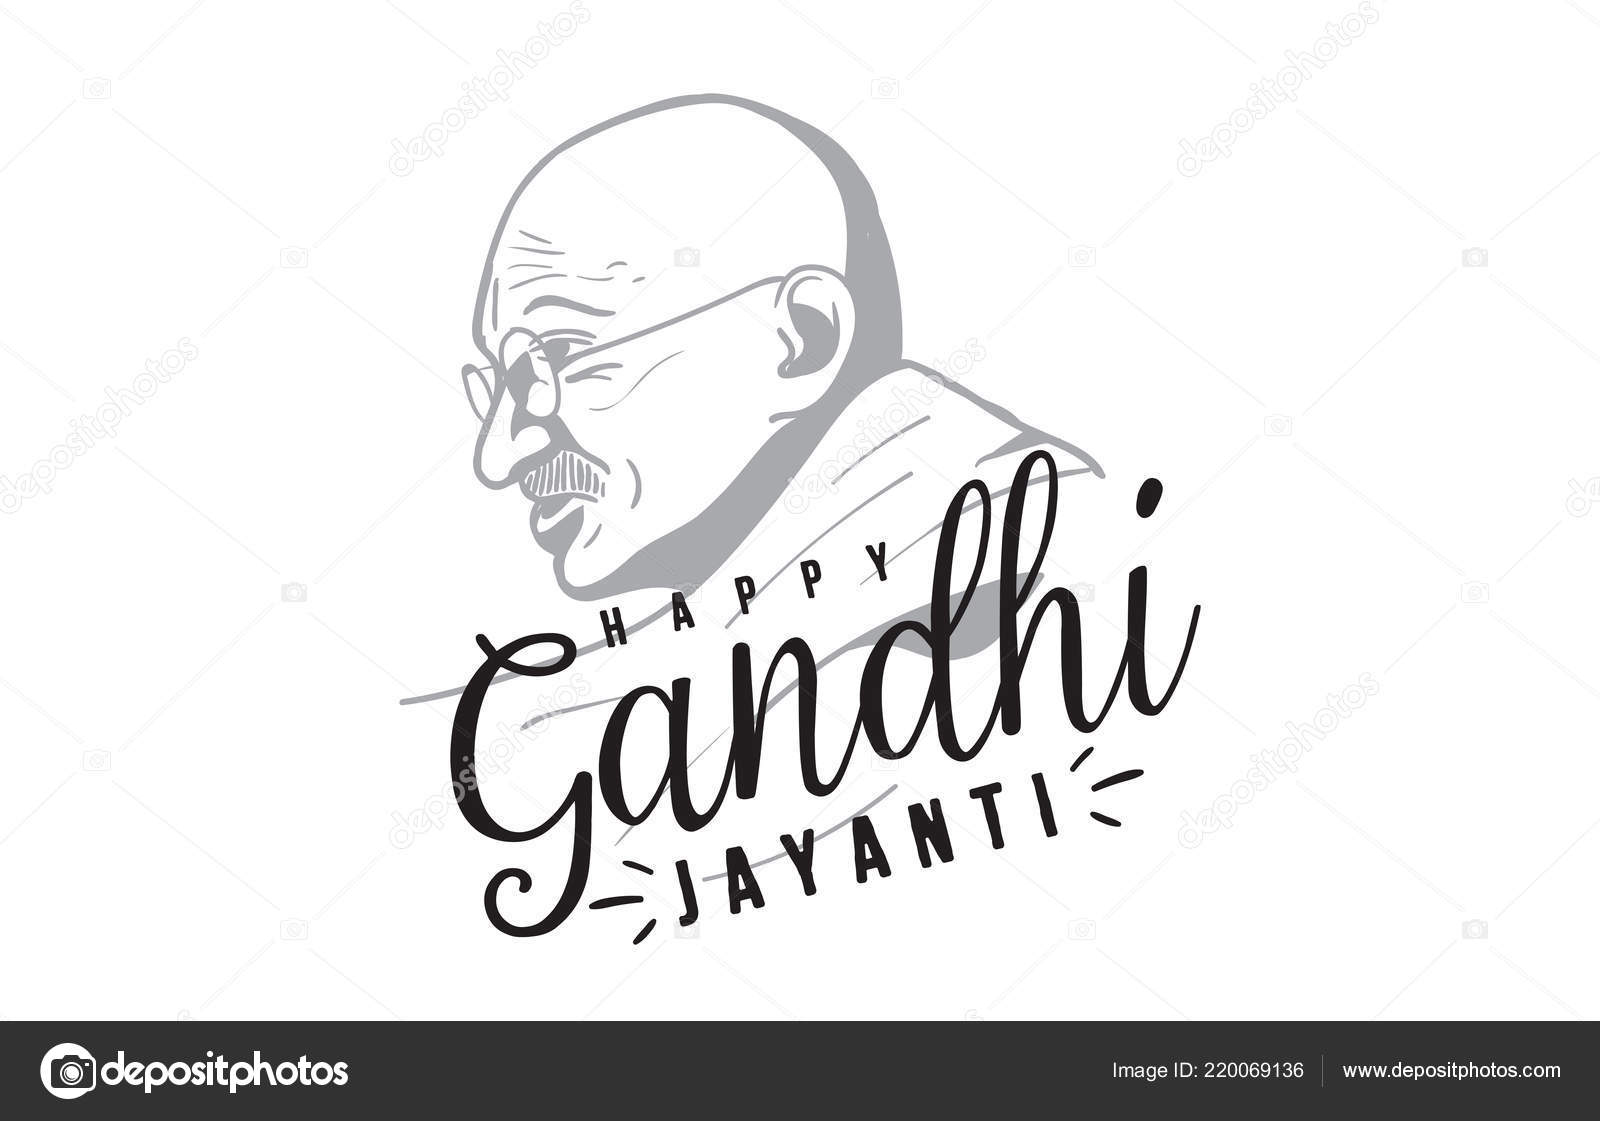 Gandhi Jayanti 2021 Remembering the Father of the Nation - YouTube